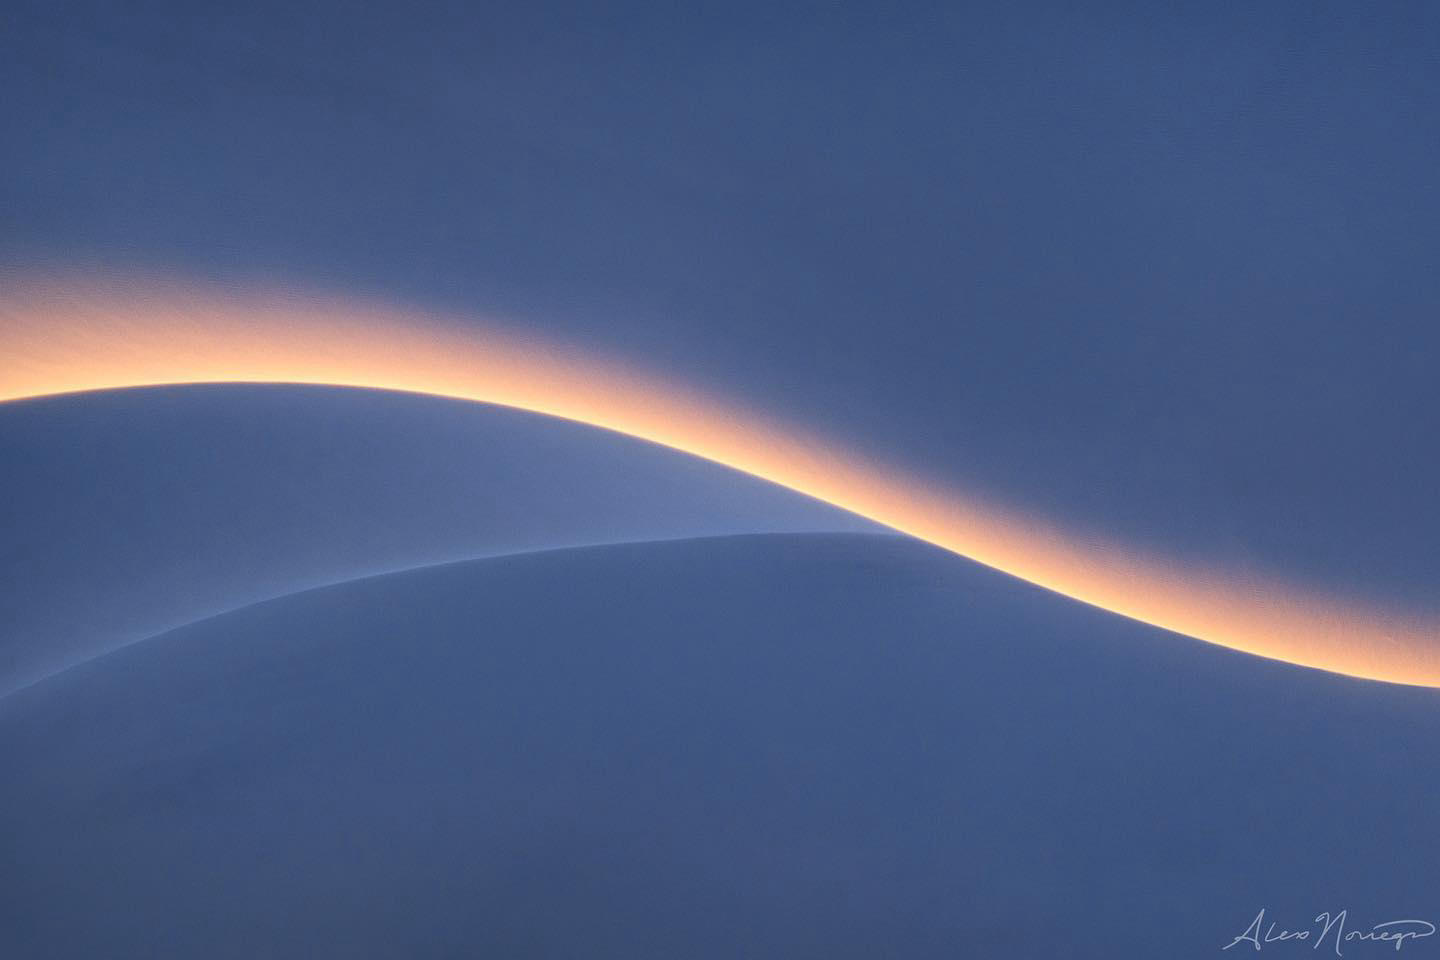 Alex Noriega - Copperline (2022)I guess I should have given up on dunes and Death Valley when they w